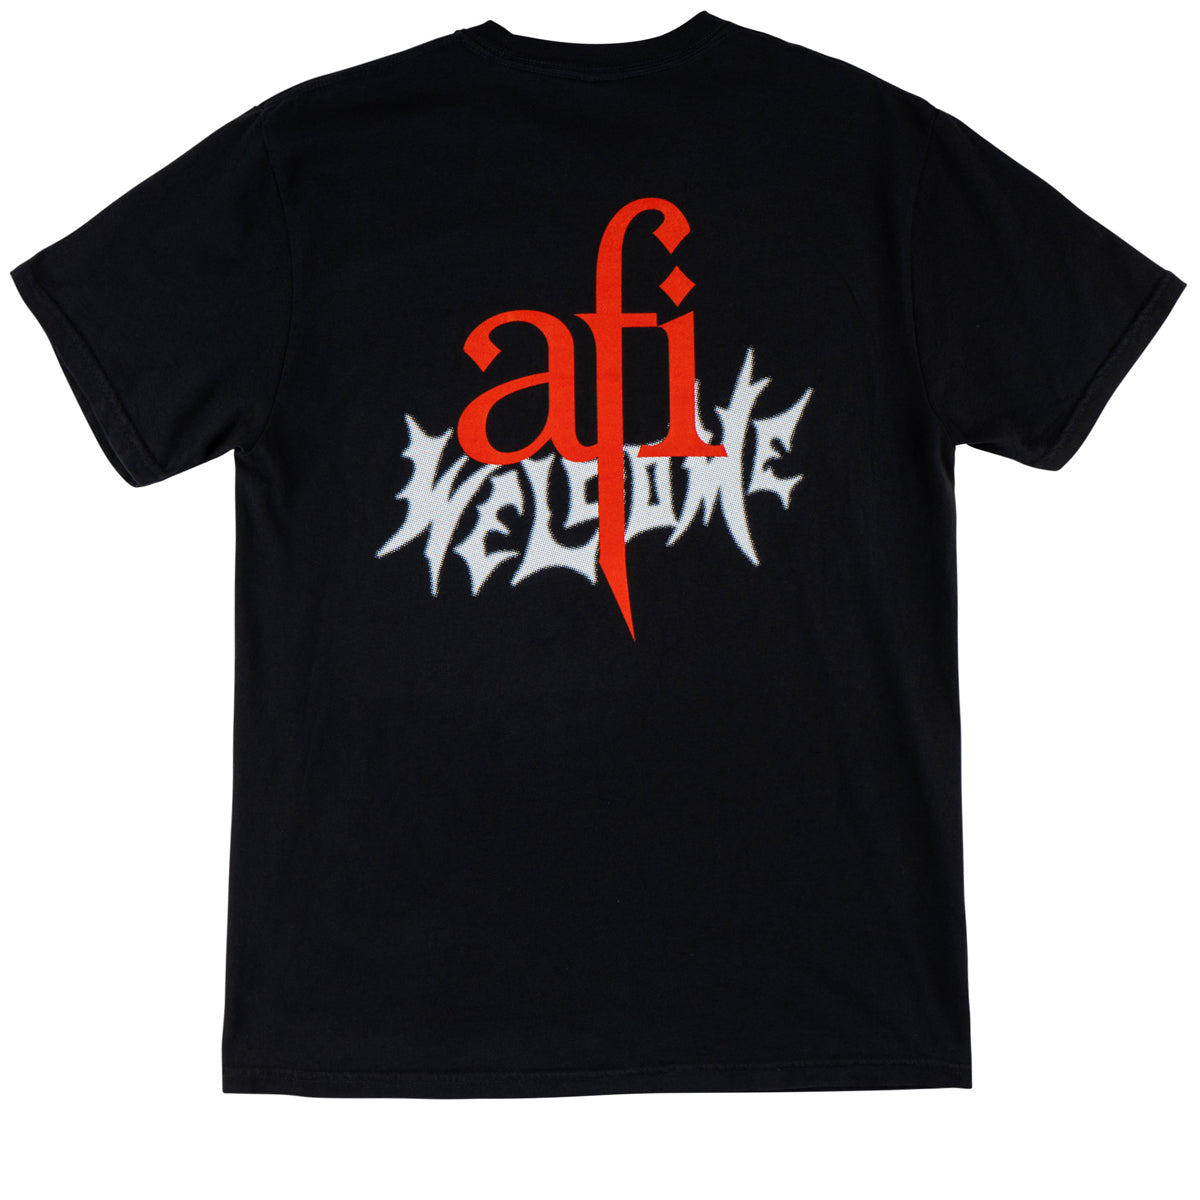 Welcome x AFI Nowhere T-Shirt - Black image 3